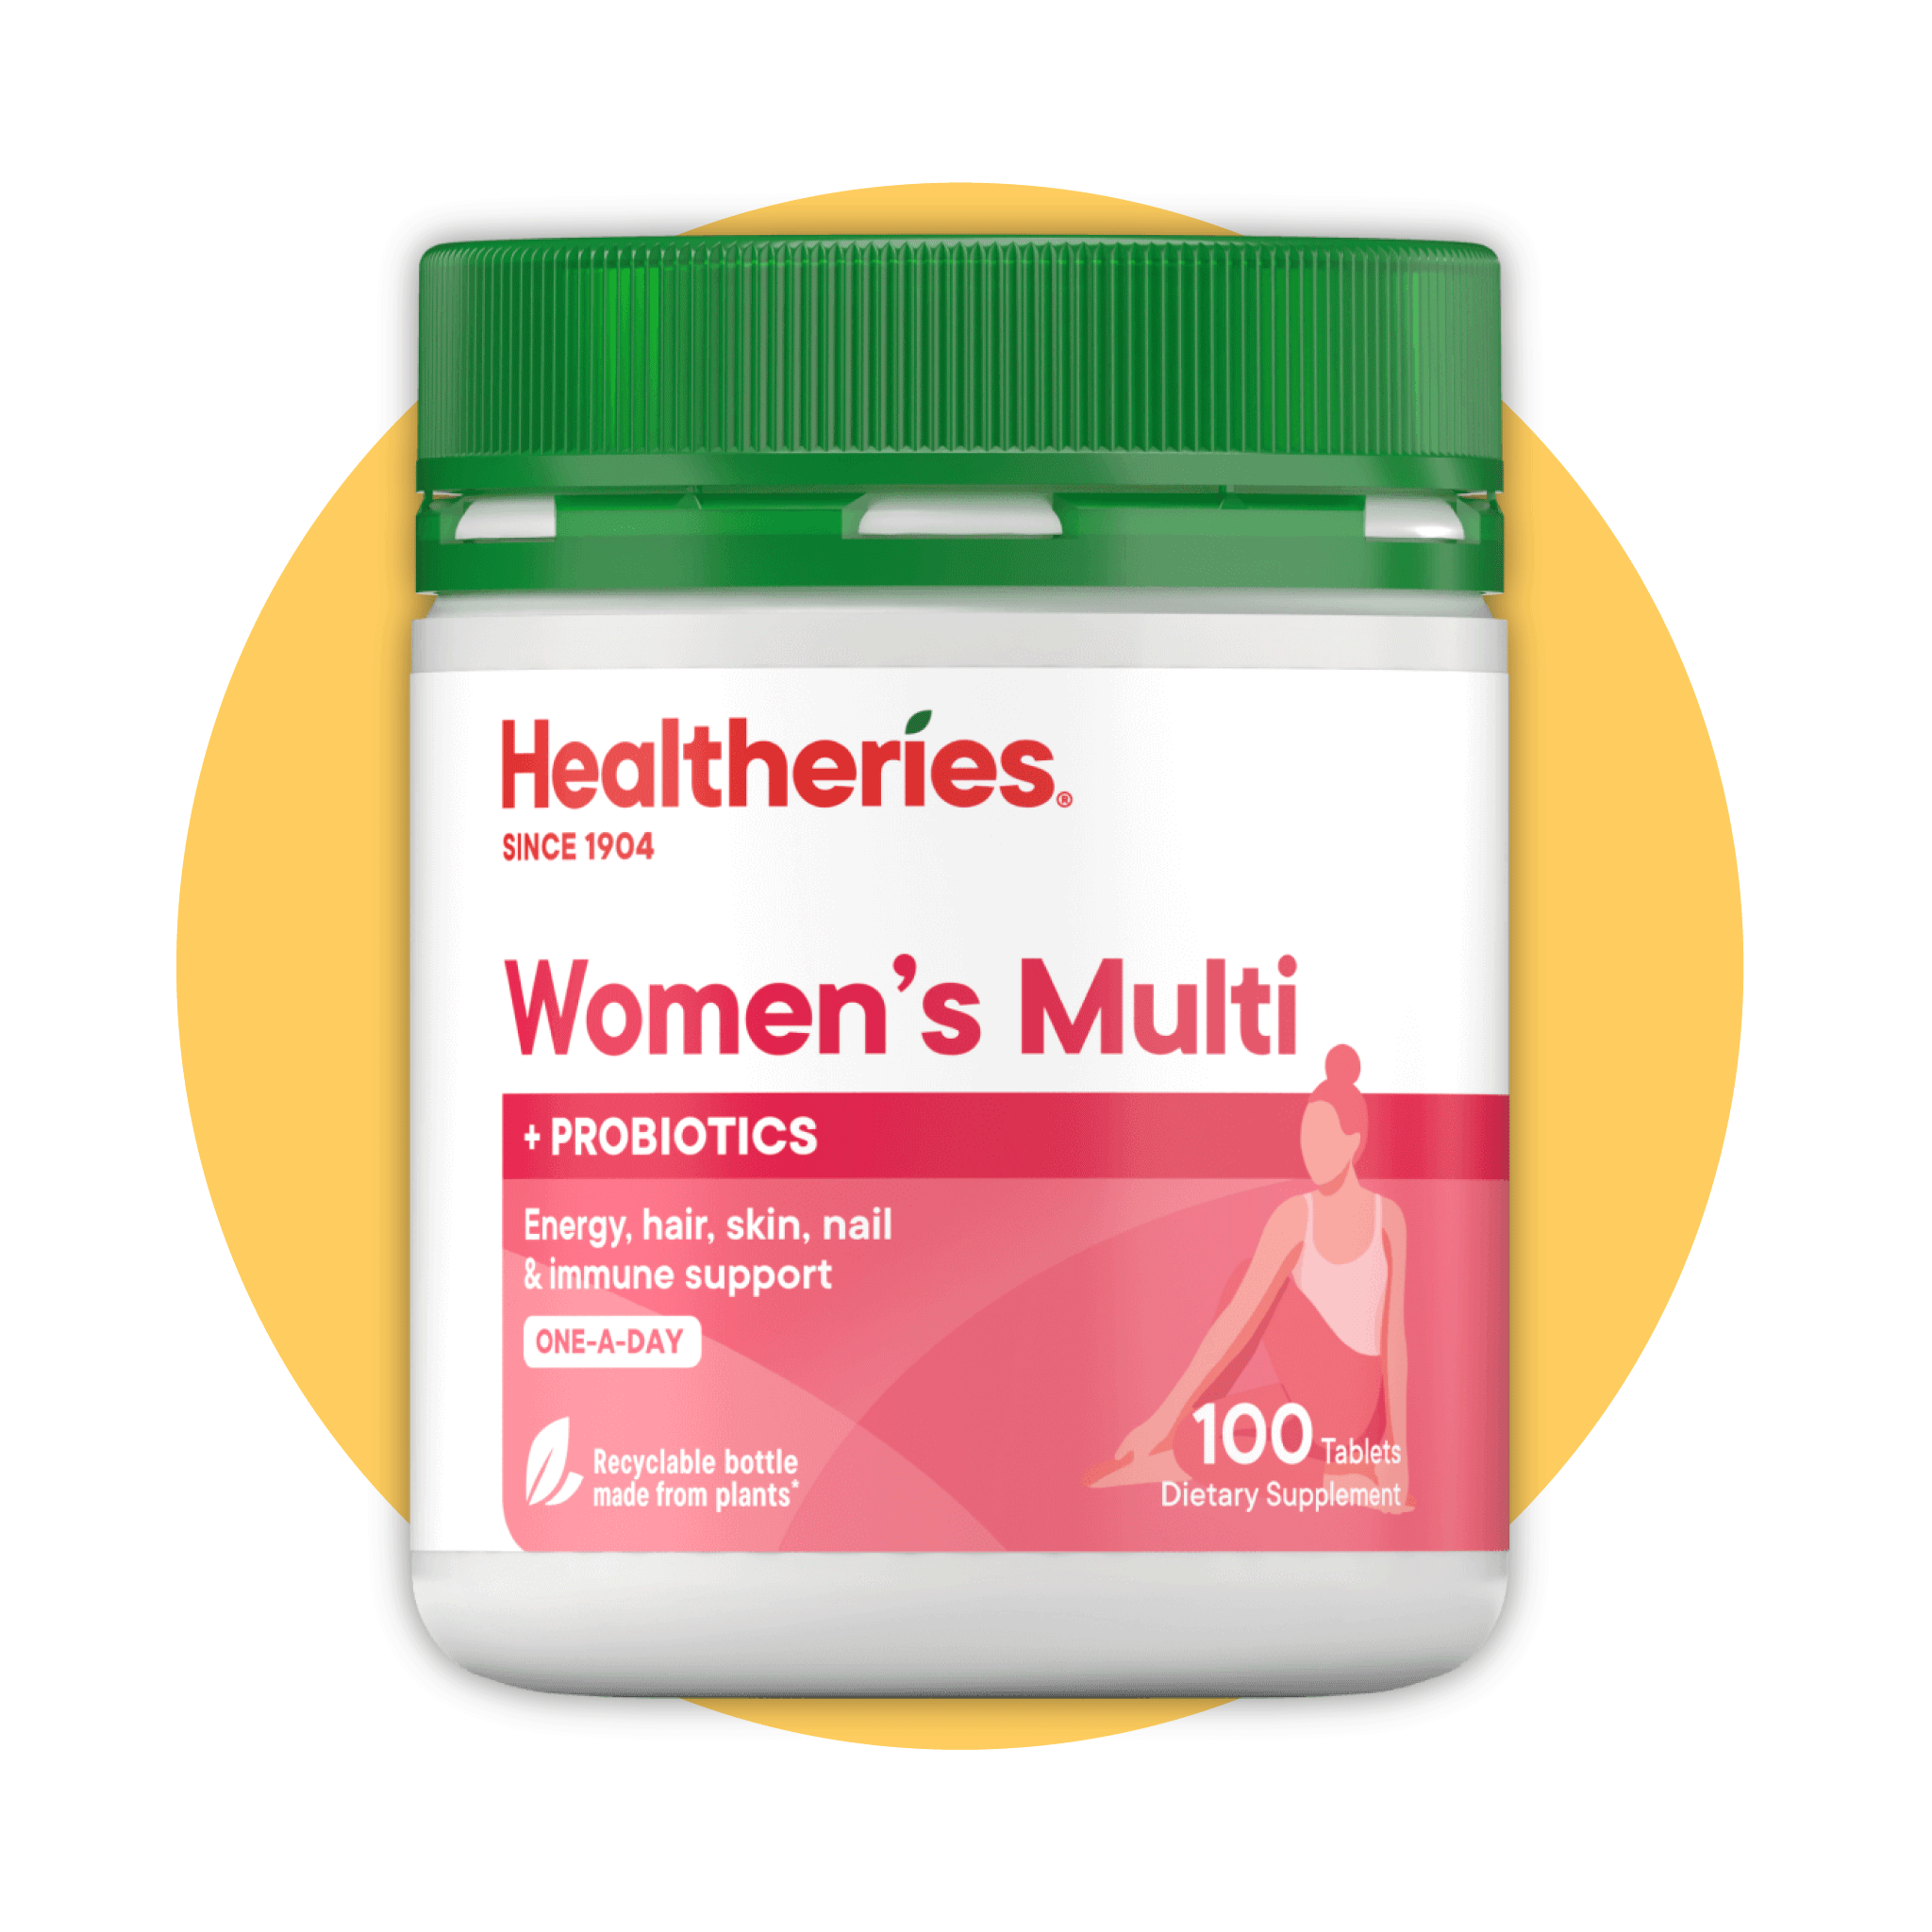 Women's Multi Tablets 100s - Healtheries Hong Kong